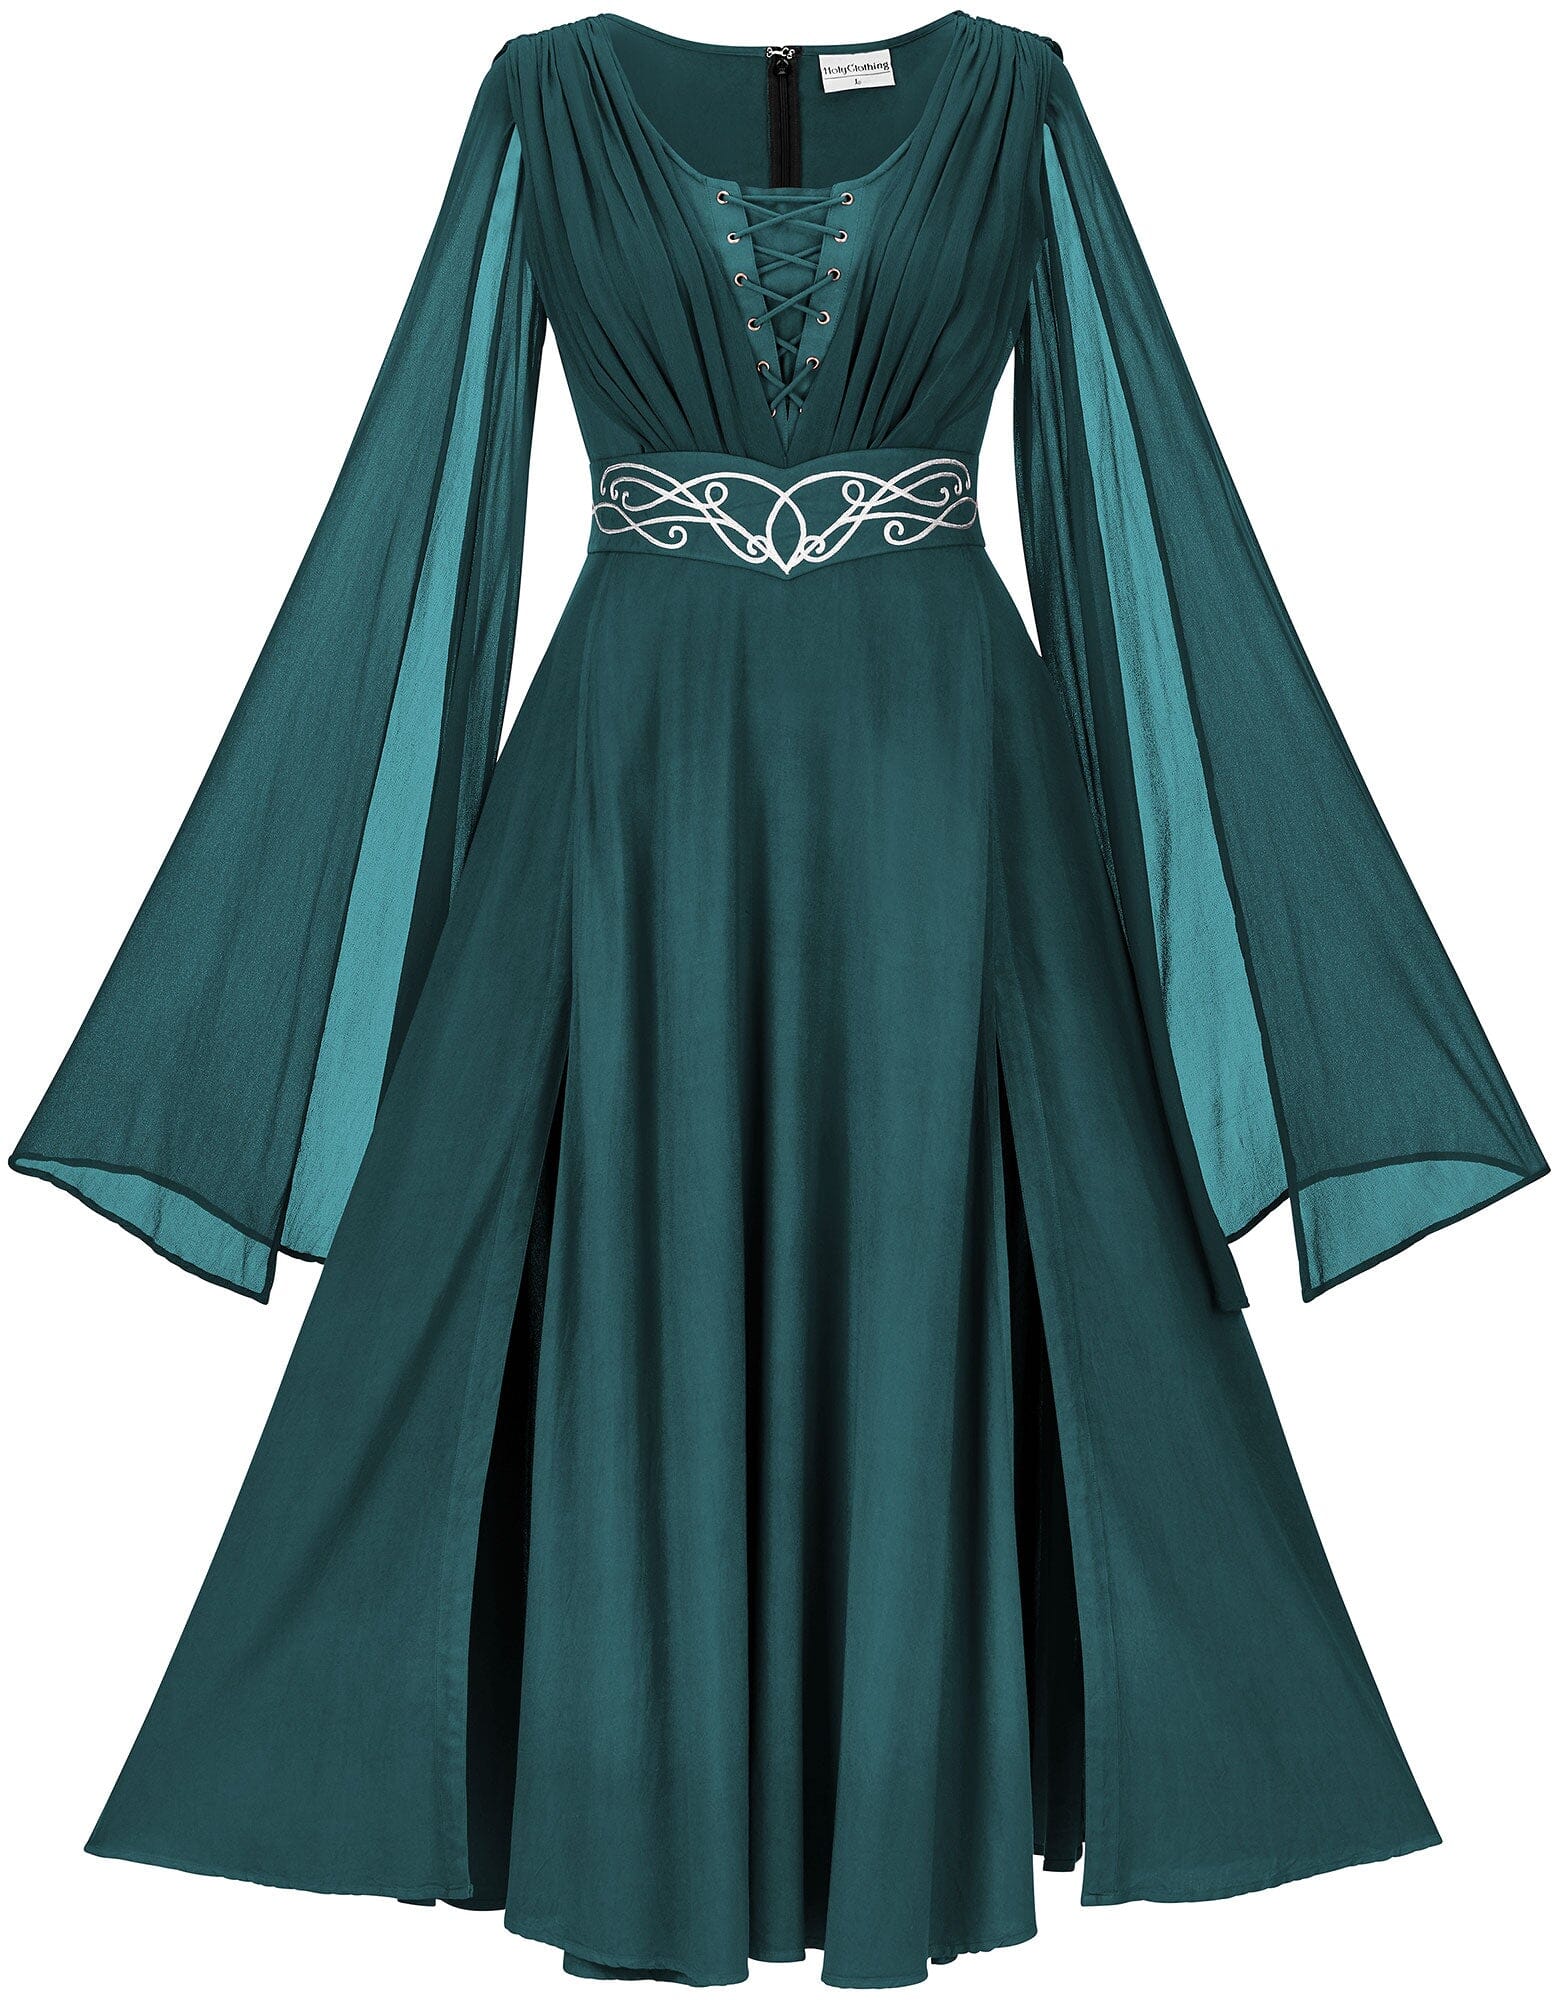 Serenity Maxi Limited Edition Teal Peacock